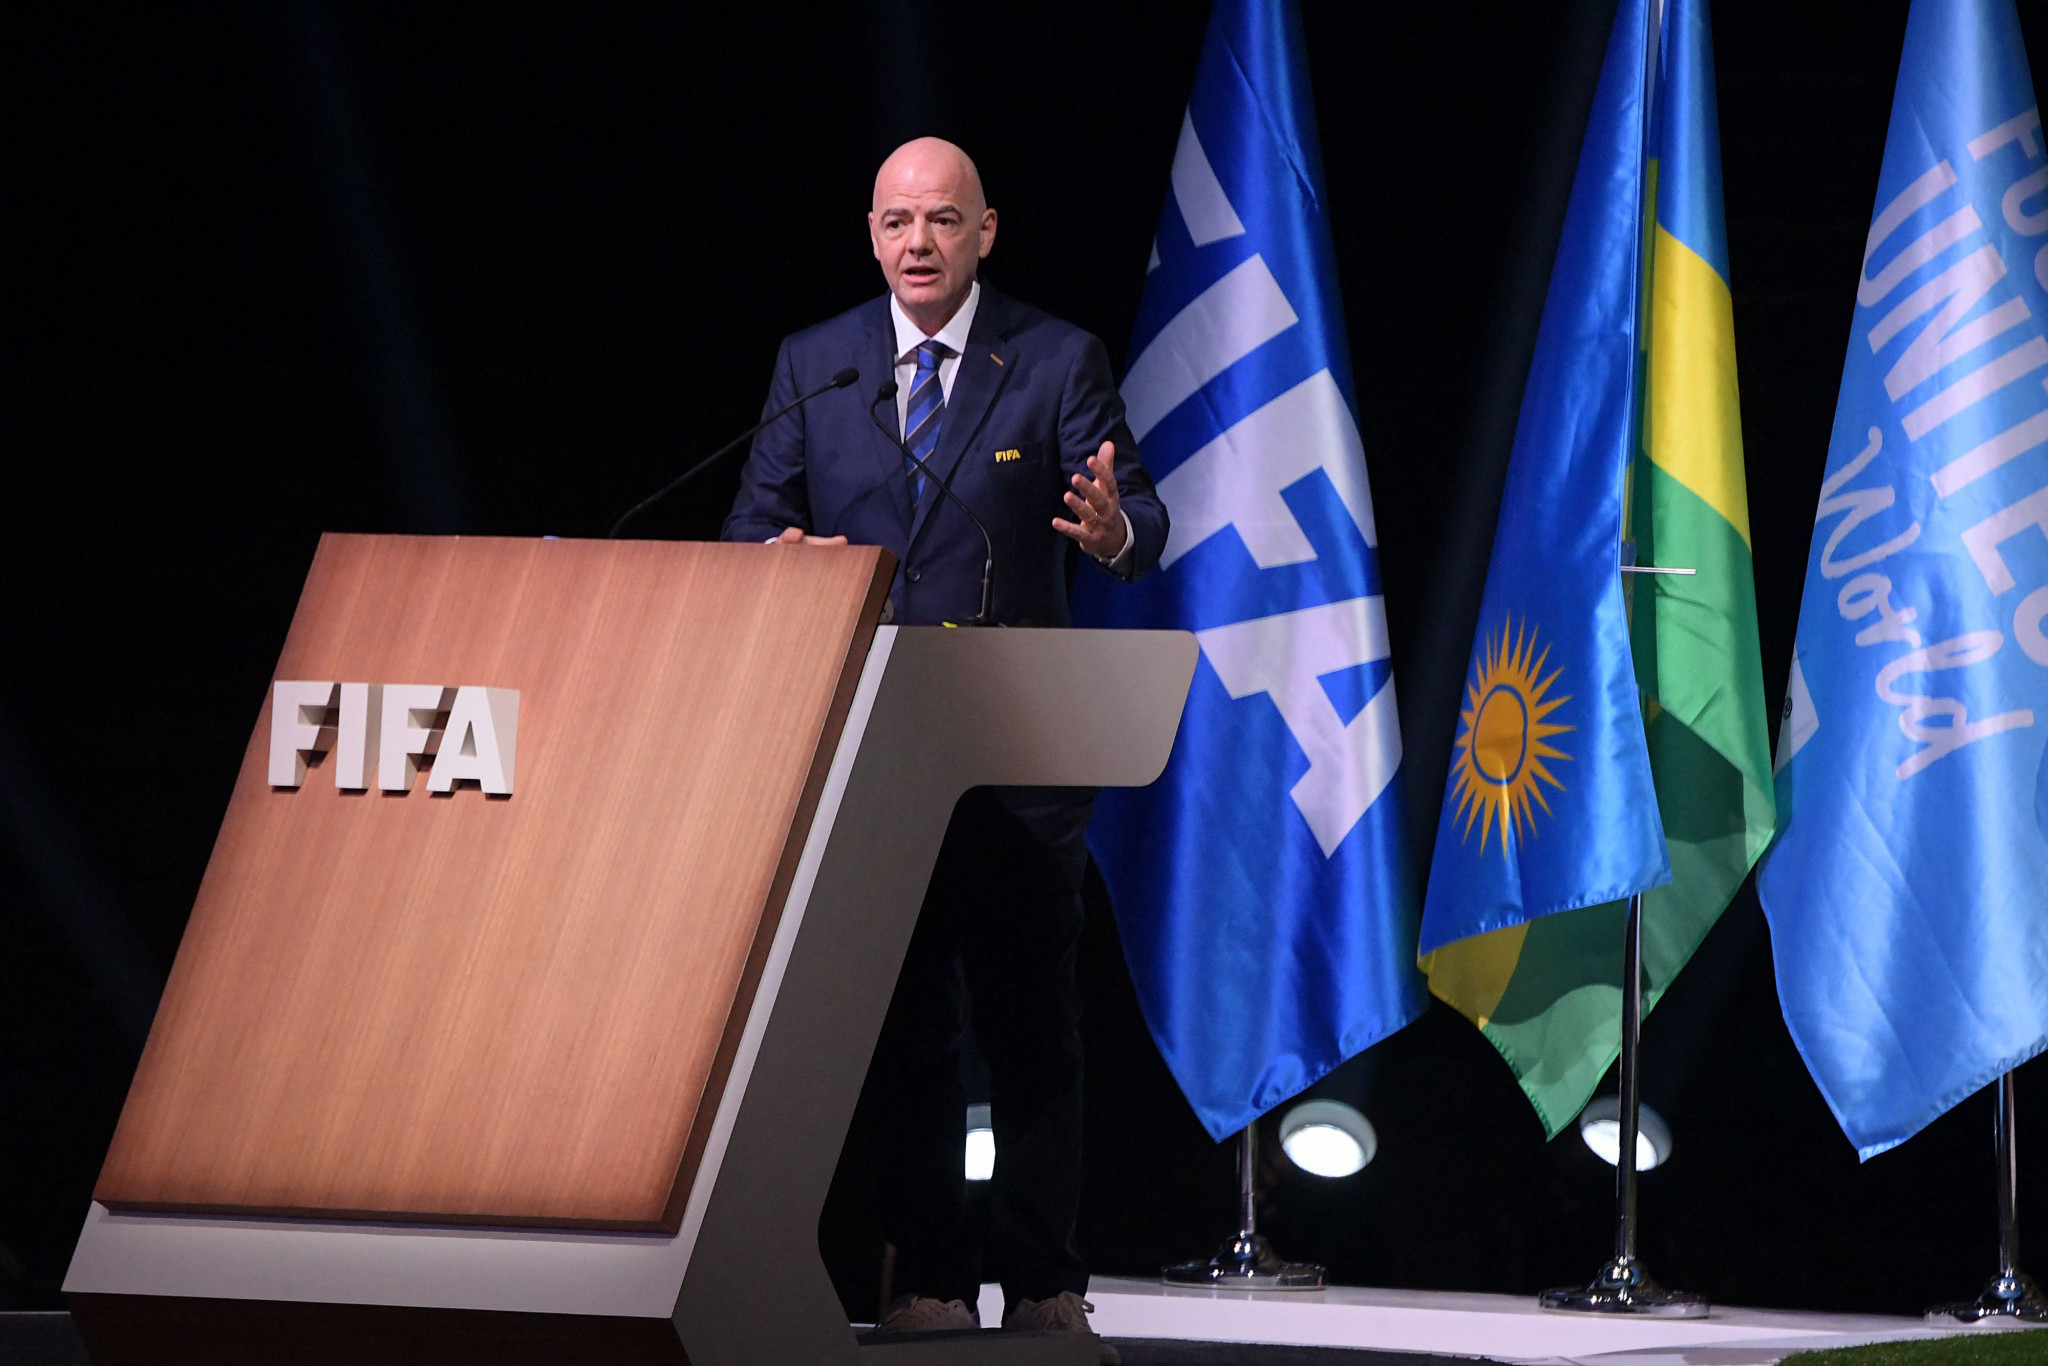 Kigali Becomes The 4th African Host of The FIFA Congress